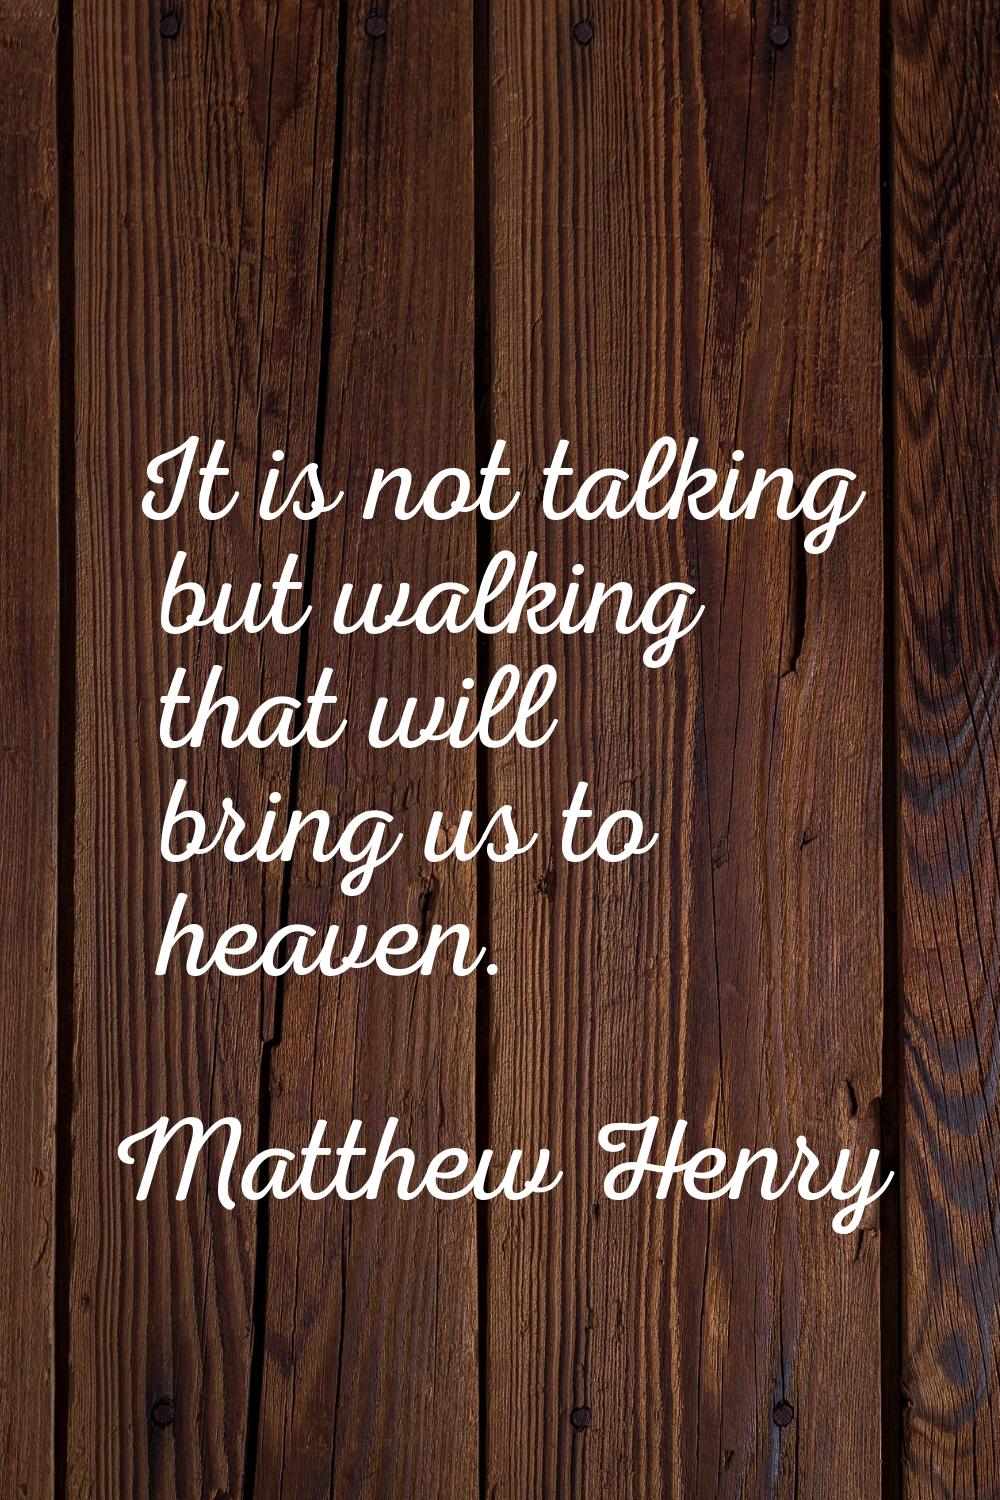 It is not talking but walking that will bring us to heaven.